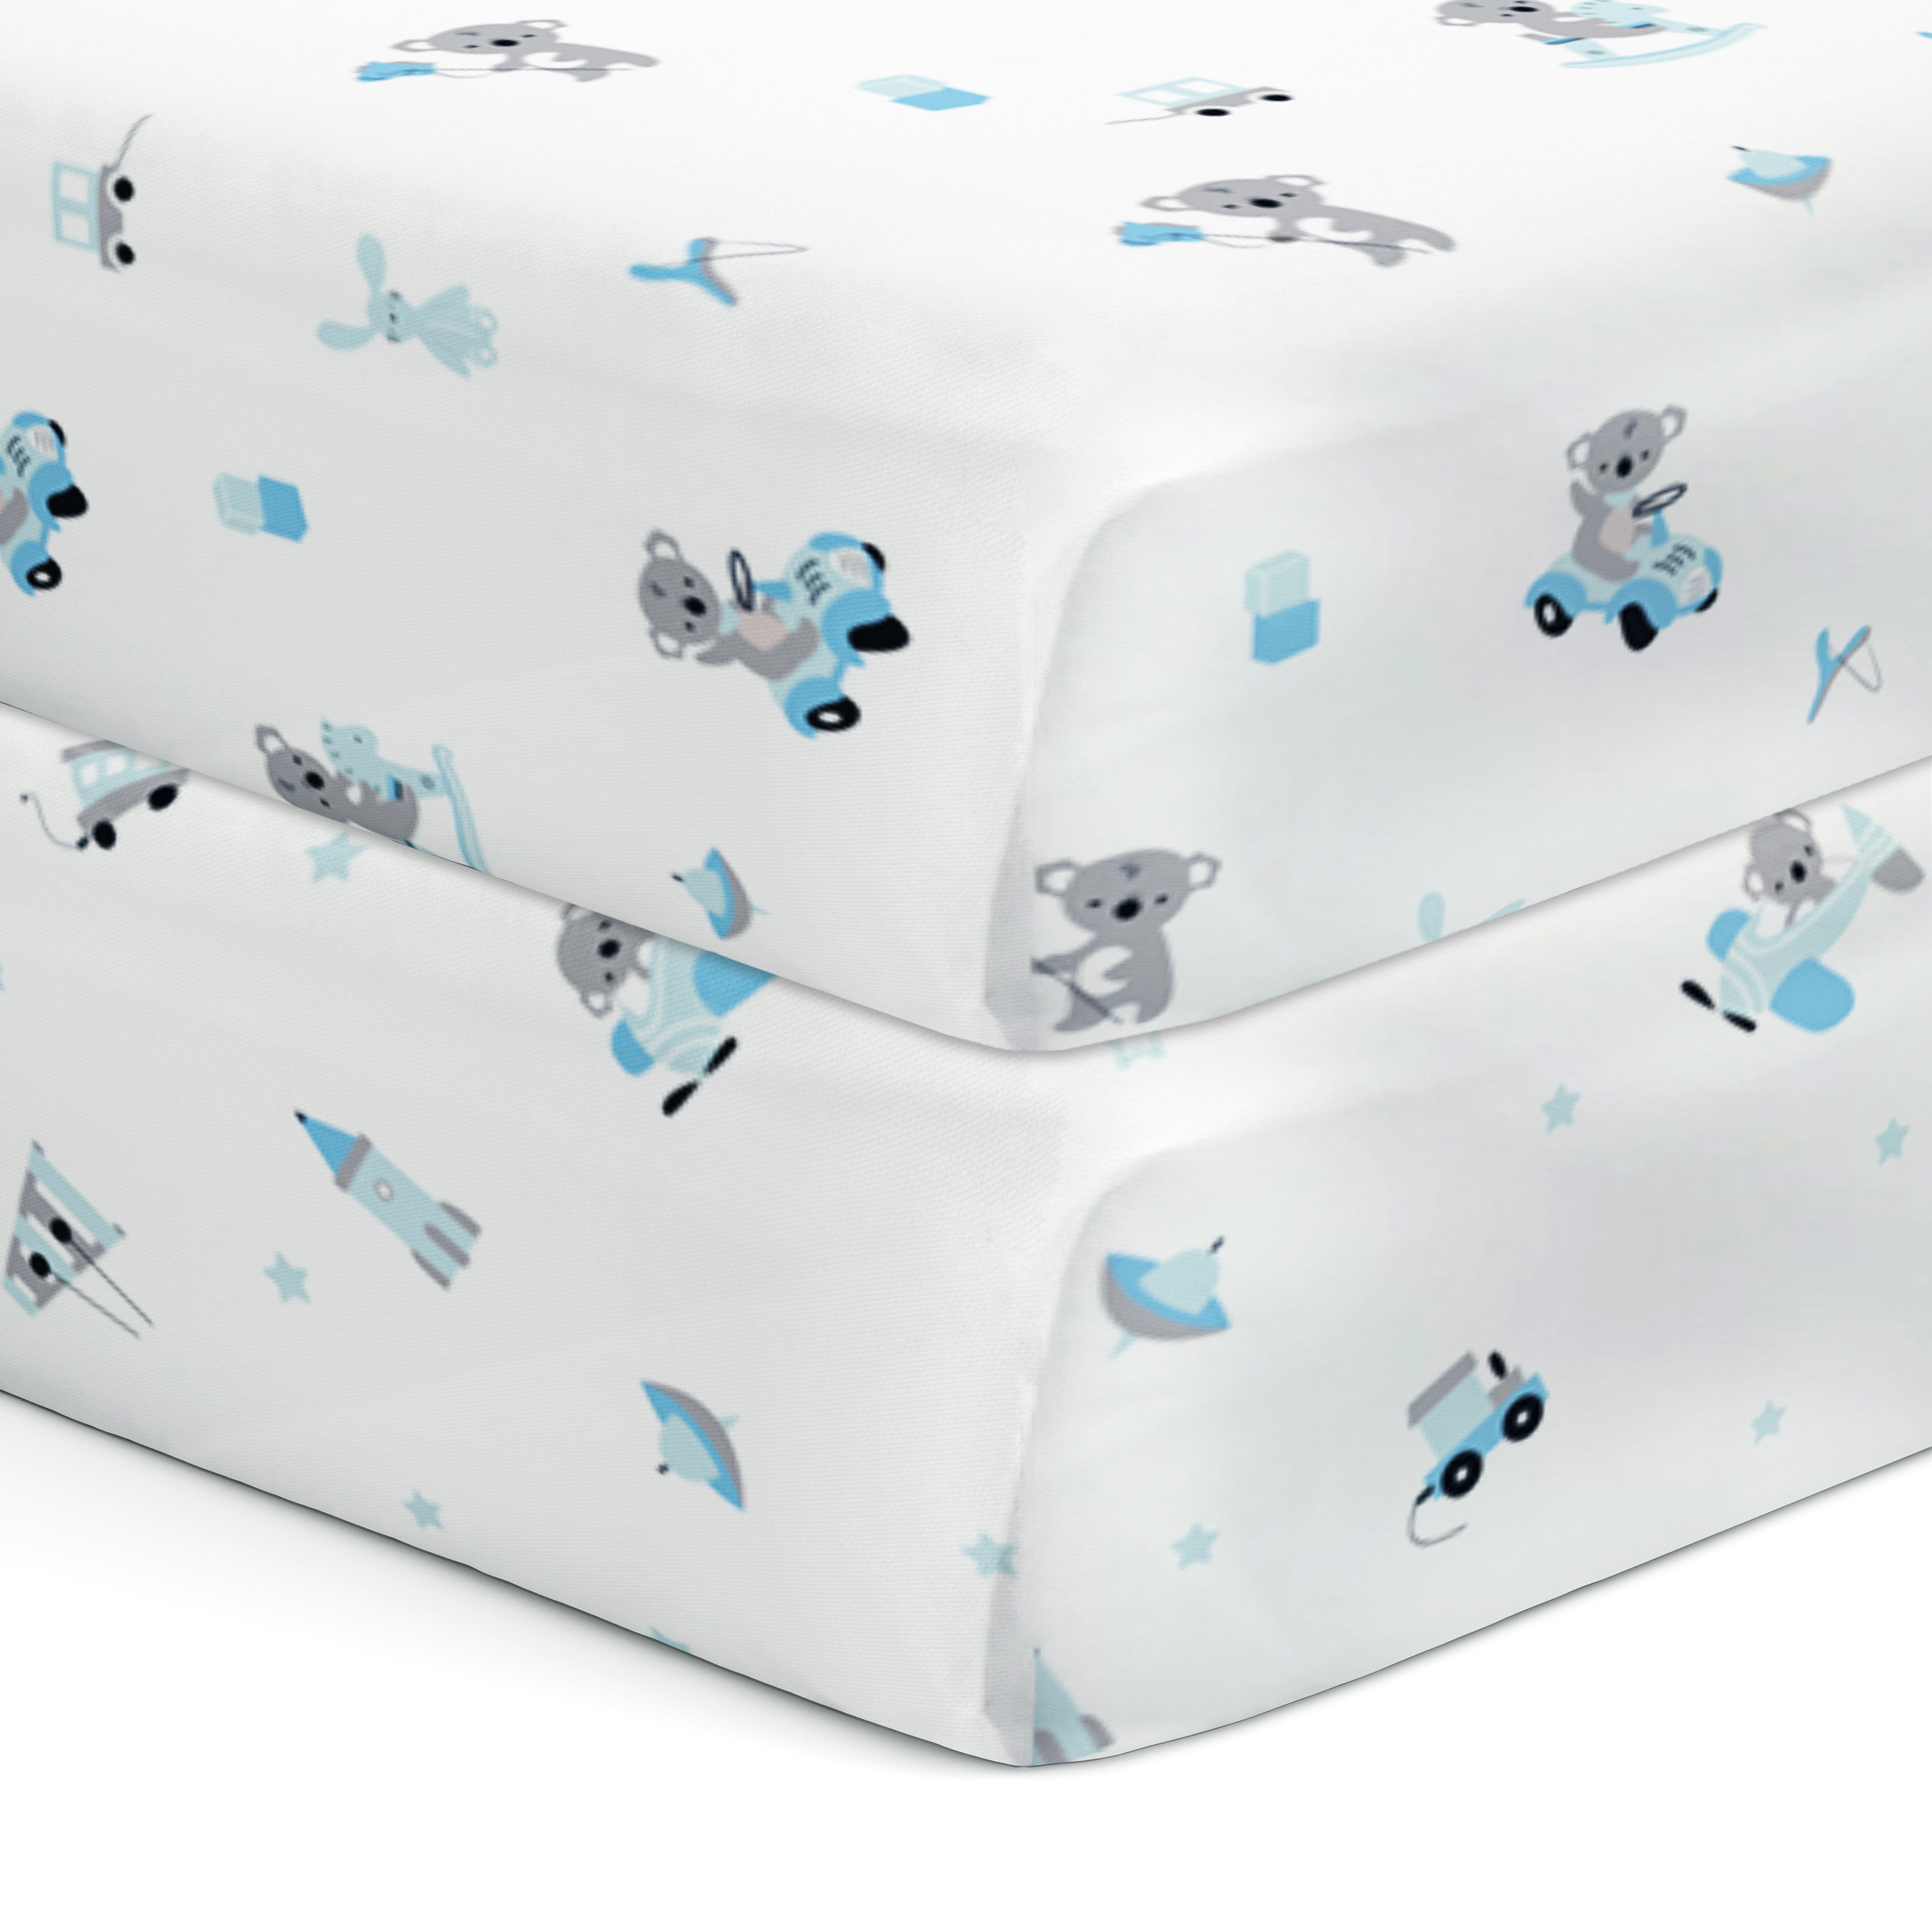 The White Cradle Flat Bed Sheet for Baby Cot & Mattress (2 pcs pack) - Blue Bear 1 and 2